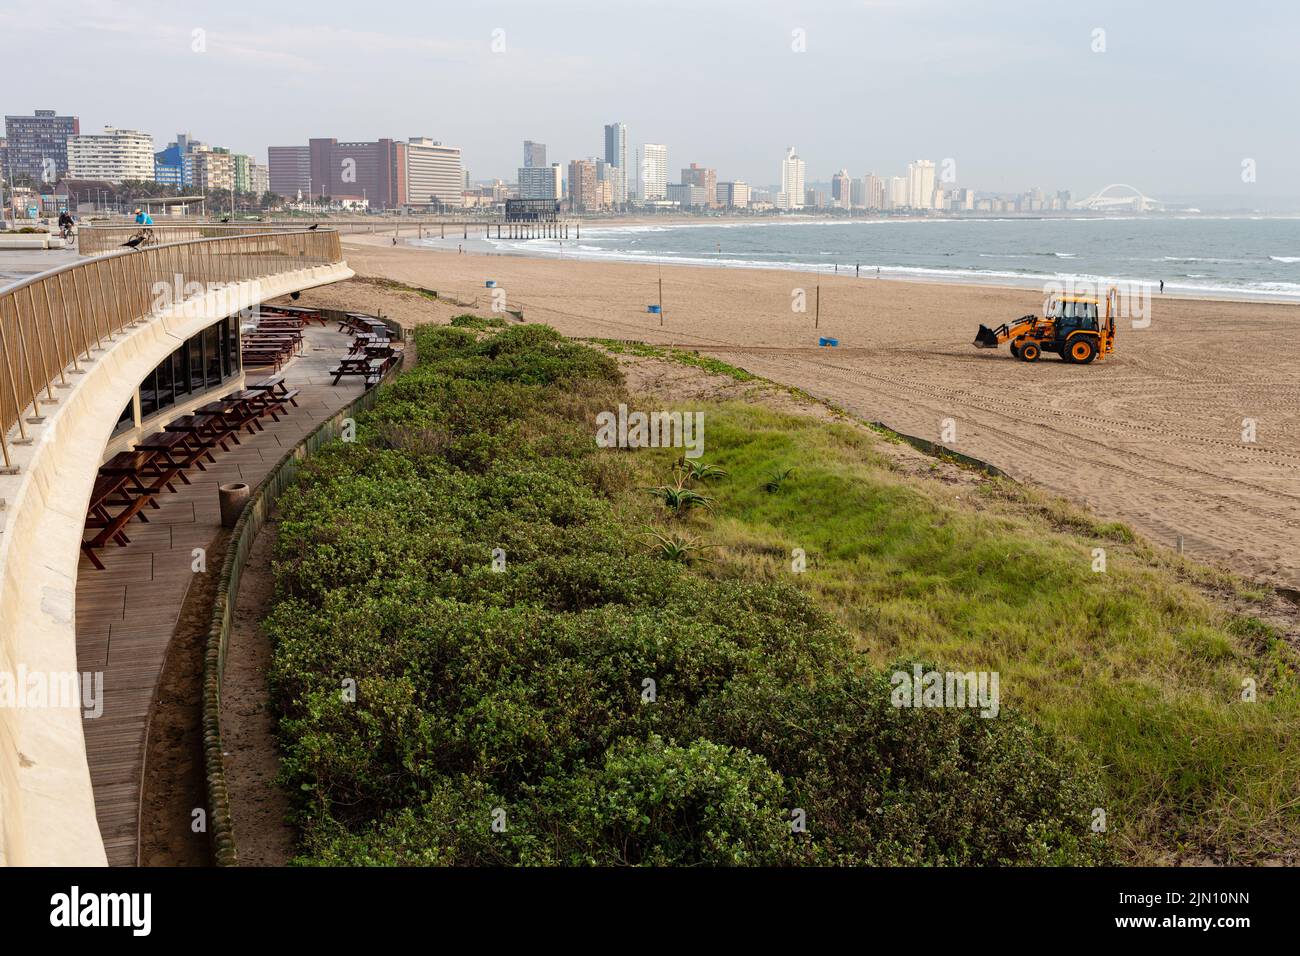 Durban, South Africa, southern promenade. Stock Photo